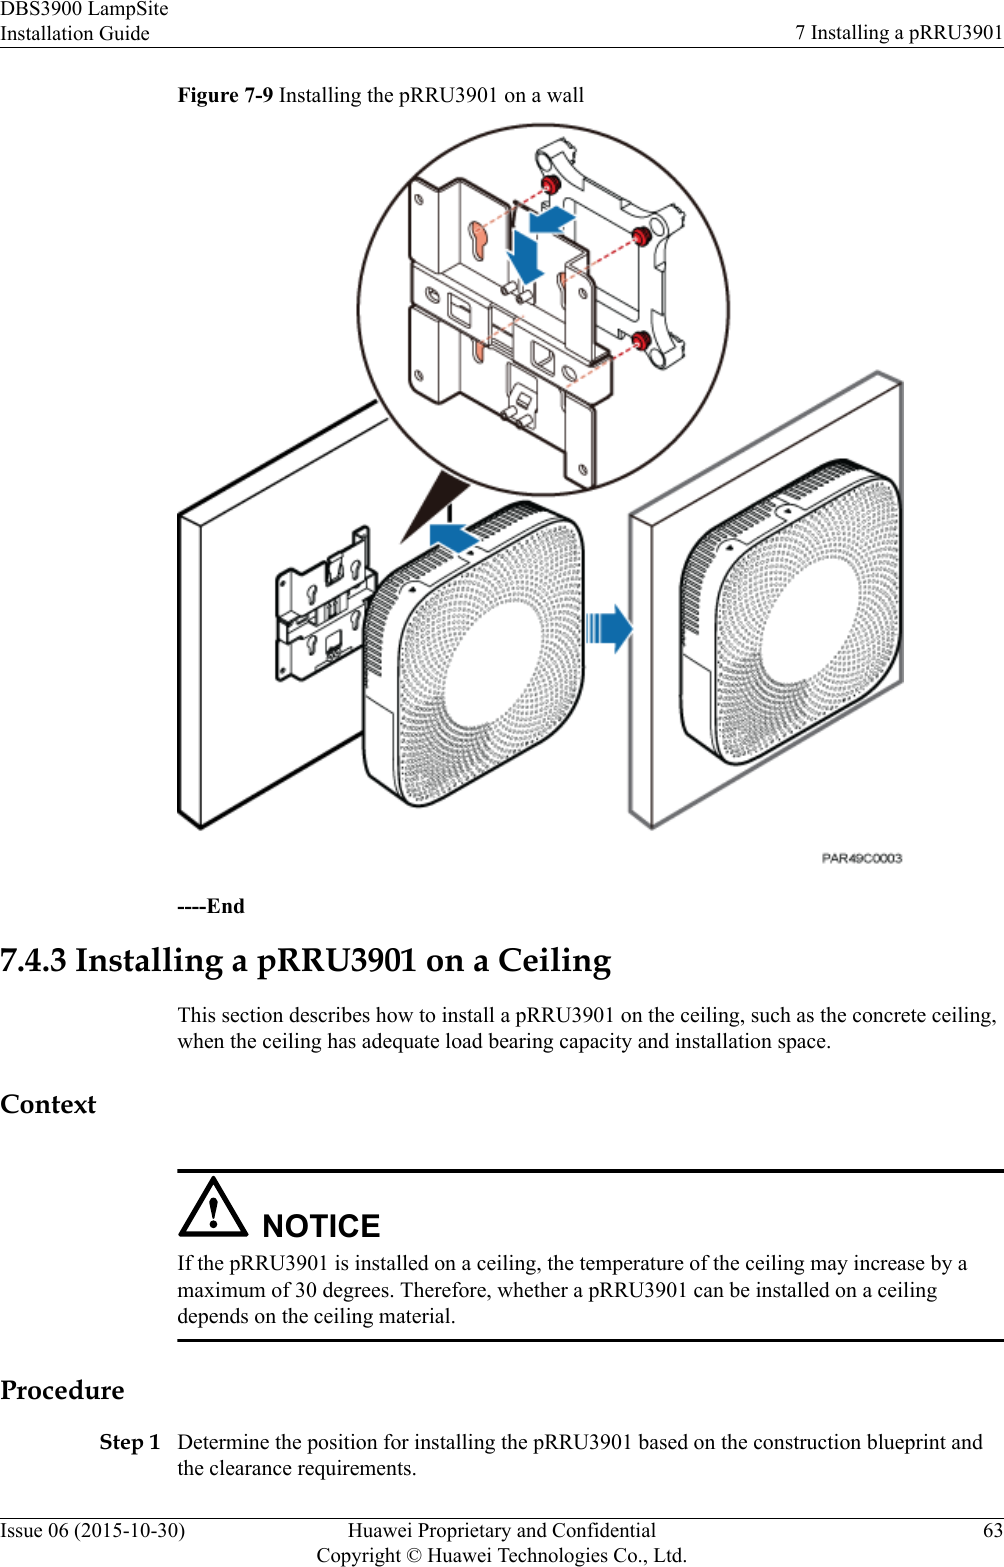 Figure 7-9 Installing the pRRU3901 on a wall----End7.4.3 Installing a pRRU3901 on a CeilingThis section describes how to install a pRRU3901 on the ceiling, such as the concrete ceiling,when the ceiling has adequate load bearing capacity and installation space.ContextNOTICEIf the pRRU3901 is installed on a ceiling, the temperature of the ceiling may increase by amaximum of 30 degrees. Therefore, whether a pRRU3901 can be installed on a ceilingdepends on the ceiling material.ProcedureStep 1 Determine the position for installing the pRRU3901 based on the construction blueprint andthe clearance requirements.DBS3900 LampSiteInstallation Guide 7 Installing a pRRU3901Issue 06 (2015-10-30) Huawei Proprietary and ConfidentialCopyright © Huawei Technologies Co., Ltd.63